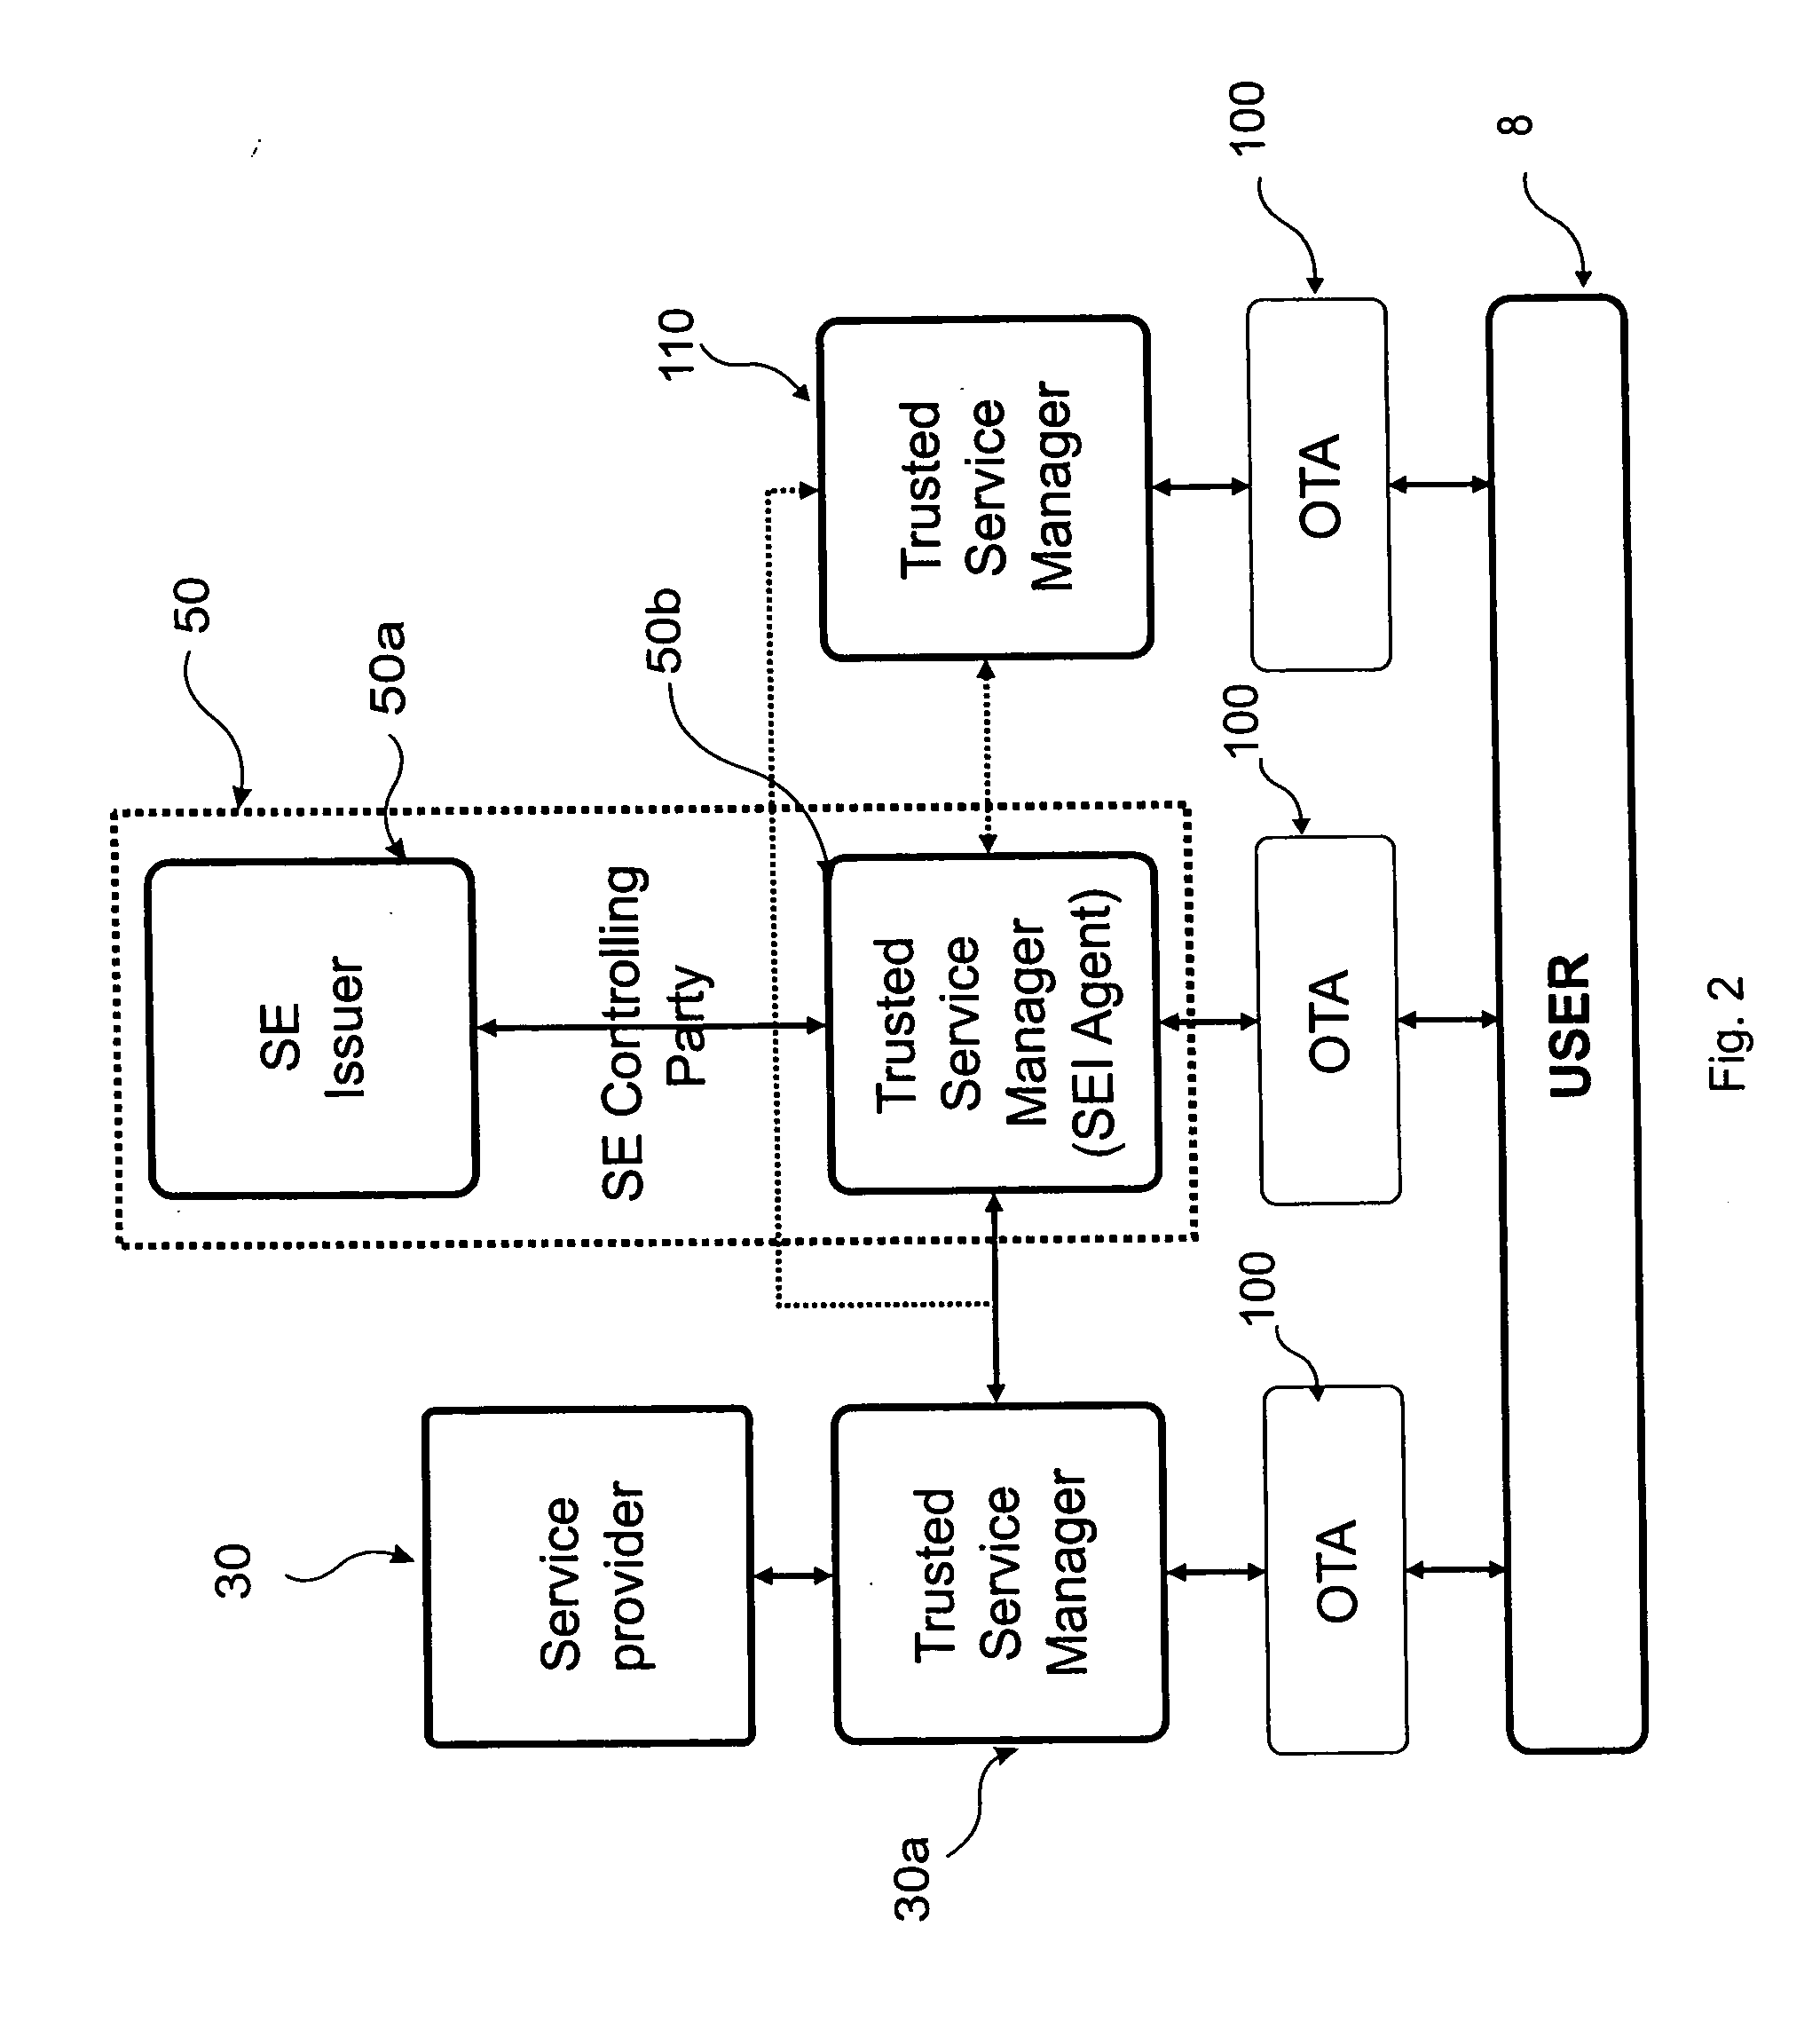 Procedure for the preparation and performing of a post issuance process on a secure element